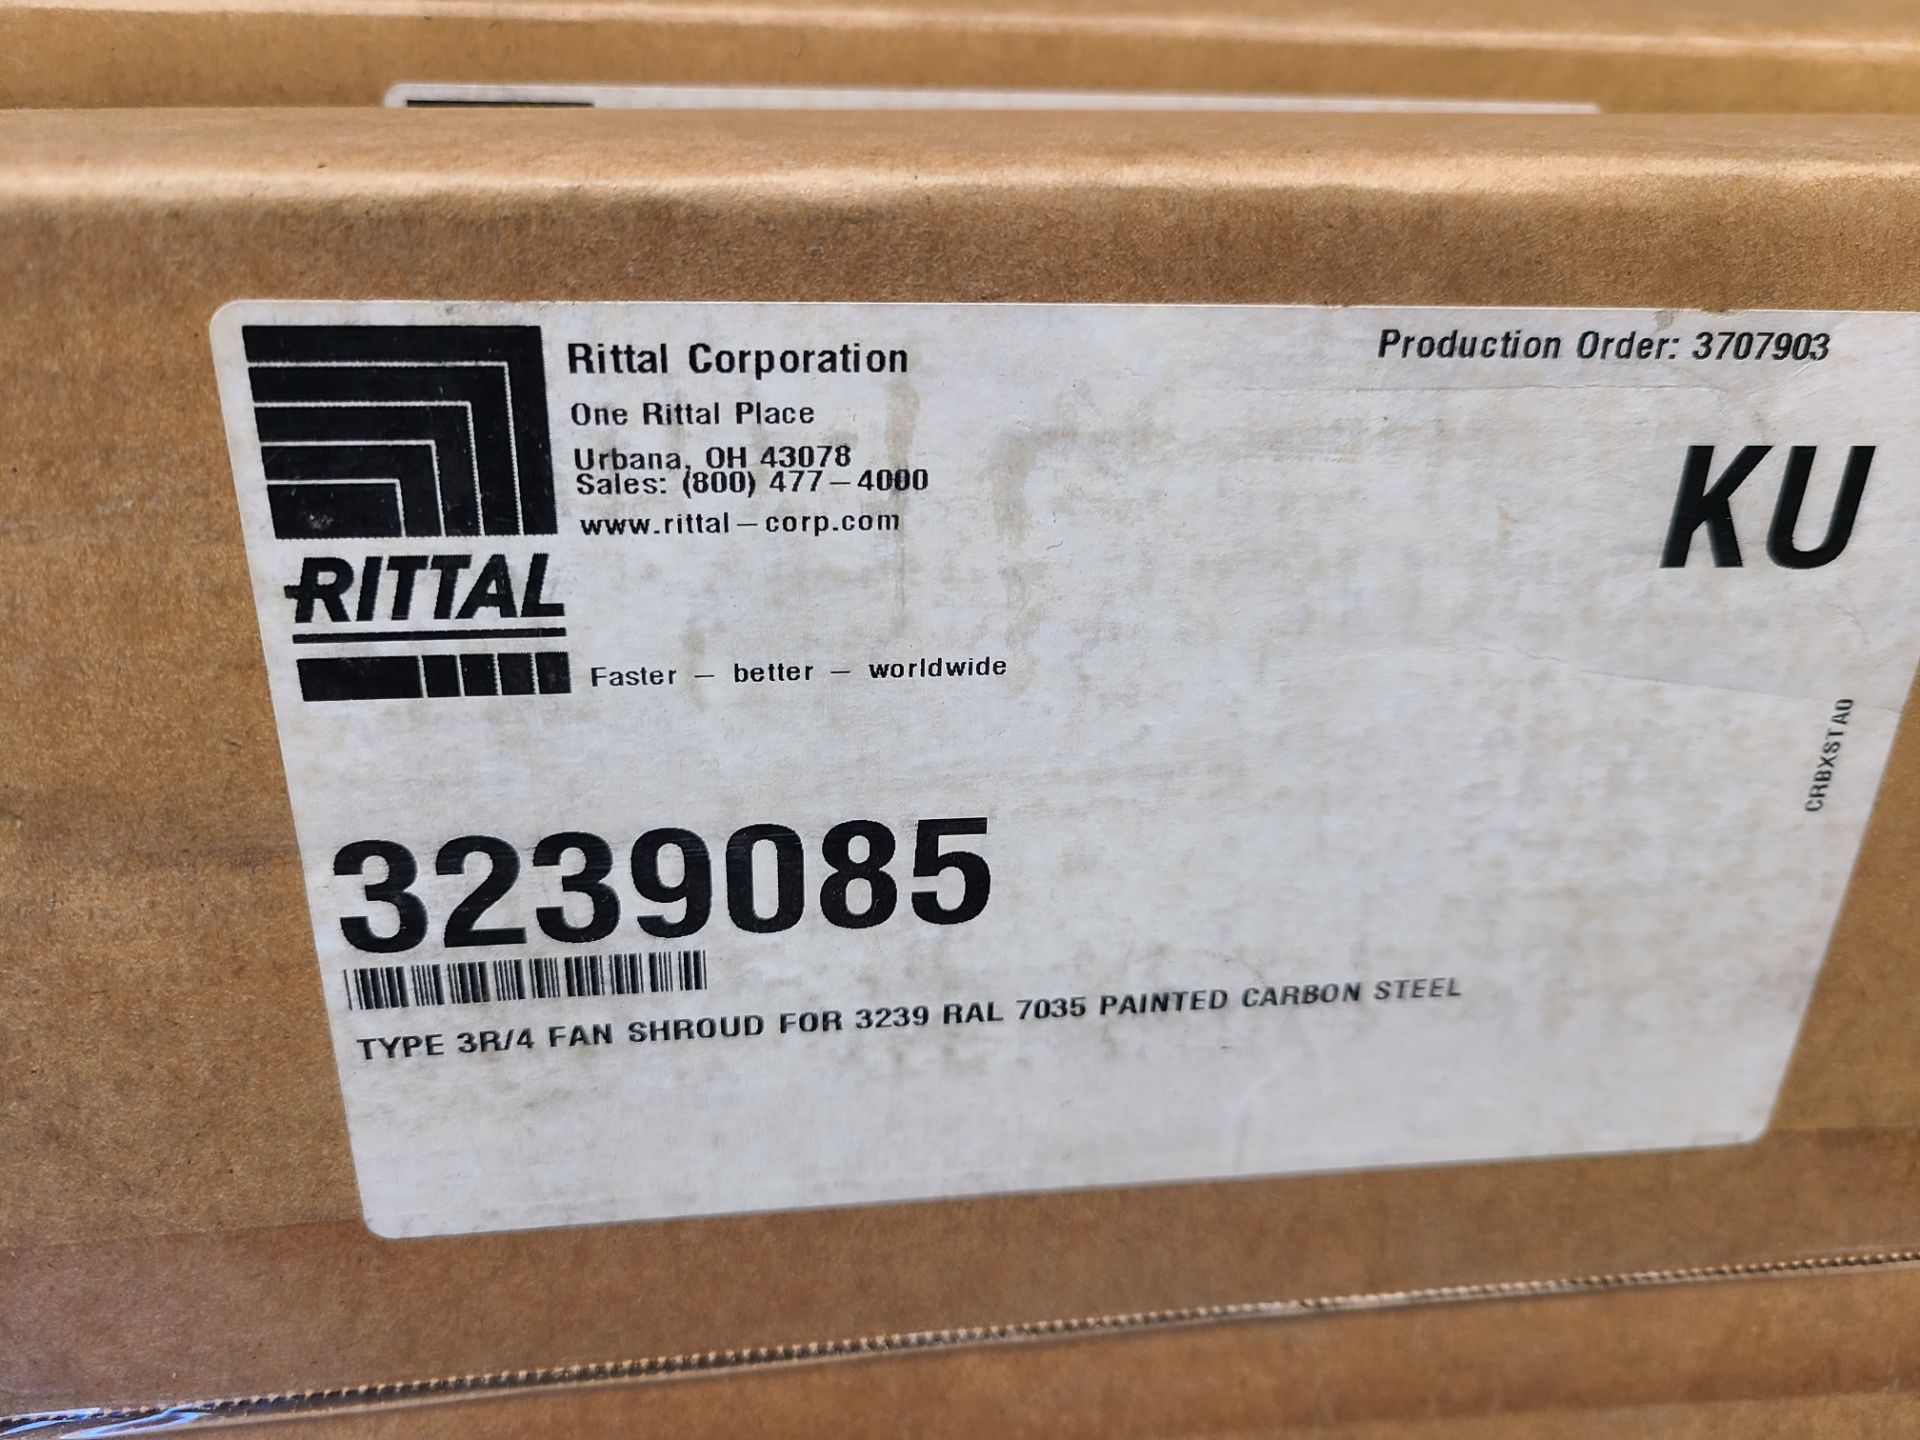 LOT OF NEW RITTAL CONTROL CABINET FAN SHROUDS - Image 3 of 3